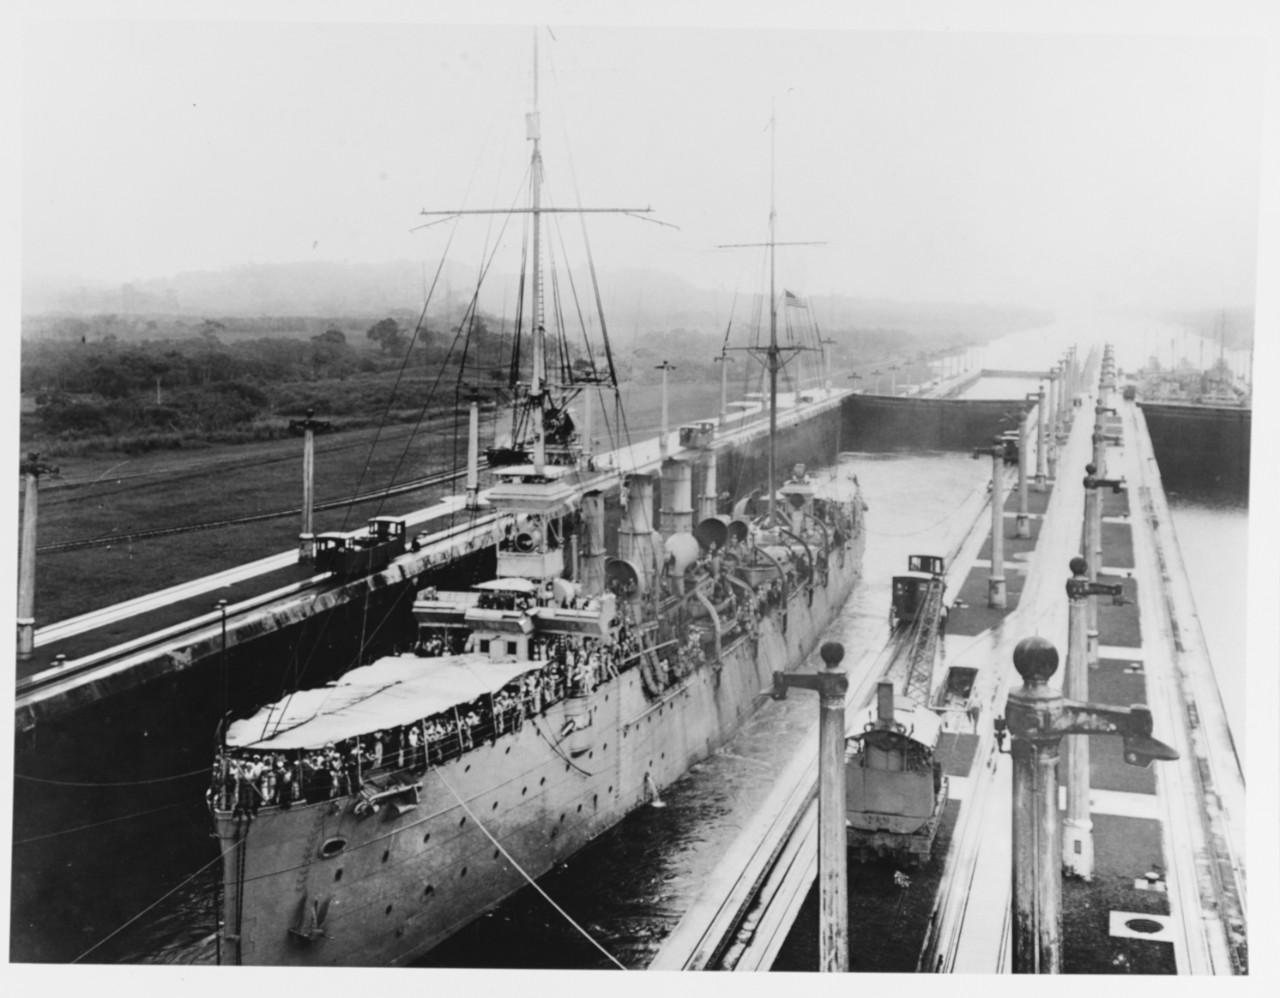 Birmingham glides through the Middle West Chamber of the Gatun Locks while the Pacific Fleet passes through the Panama Canal, 24 July 1919. (Naval History and Heritage Command Photograph NH 75717)